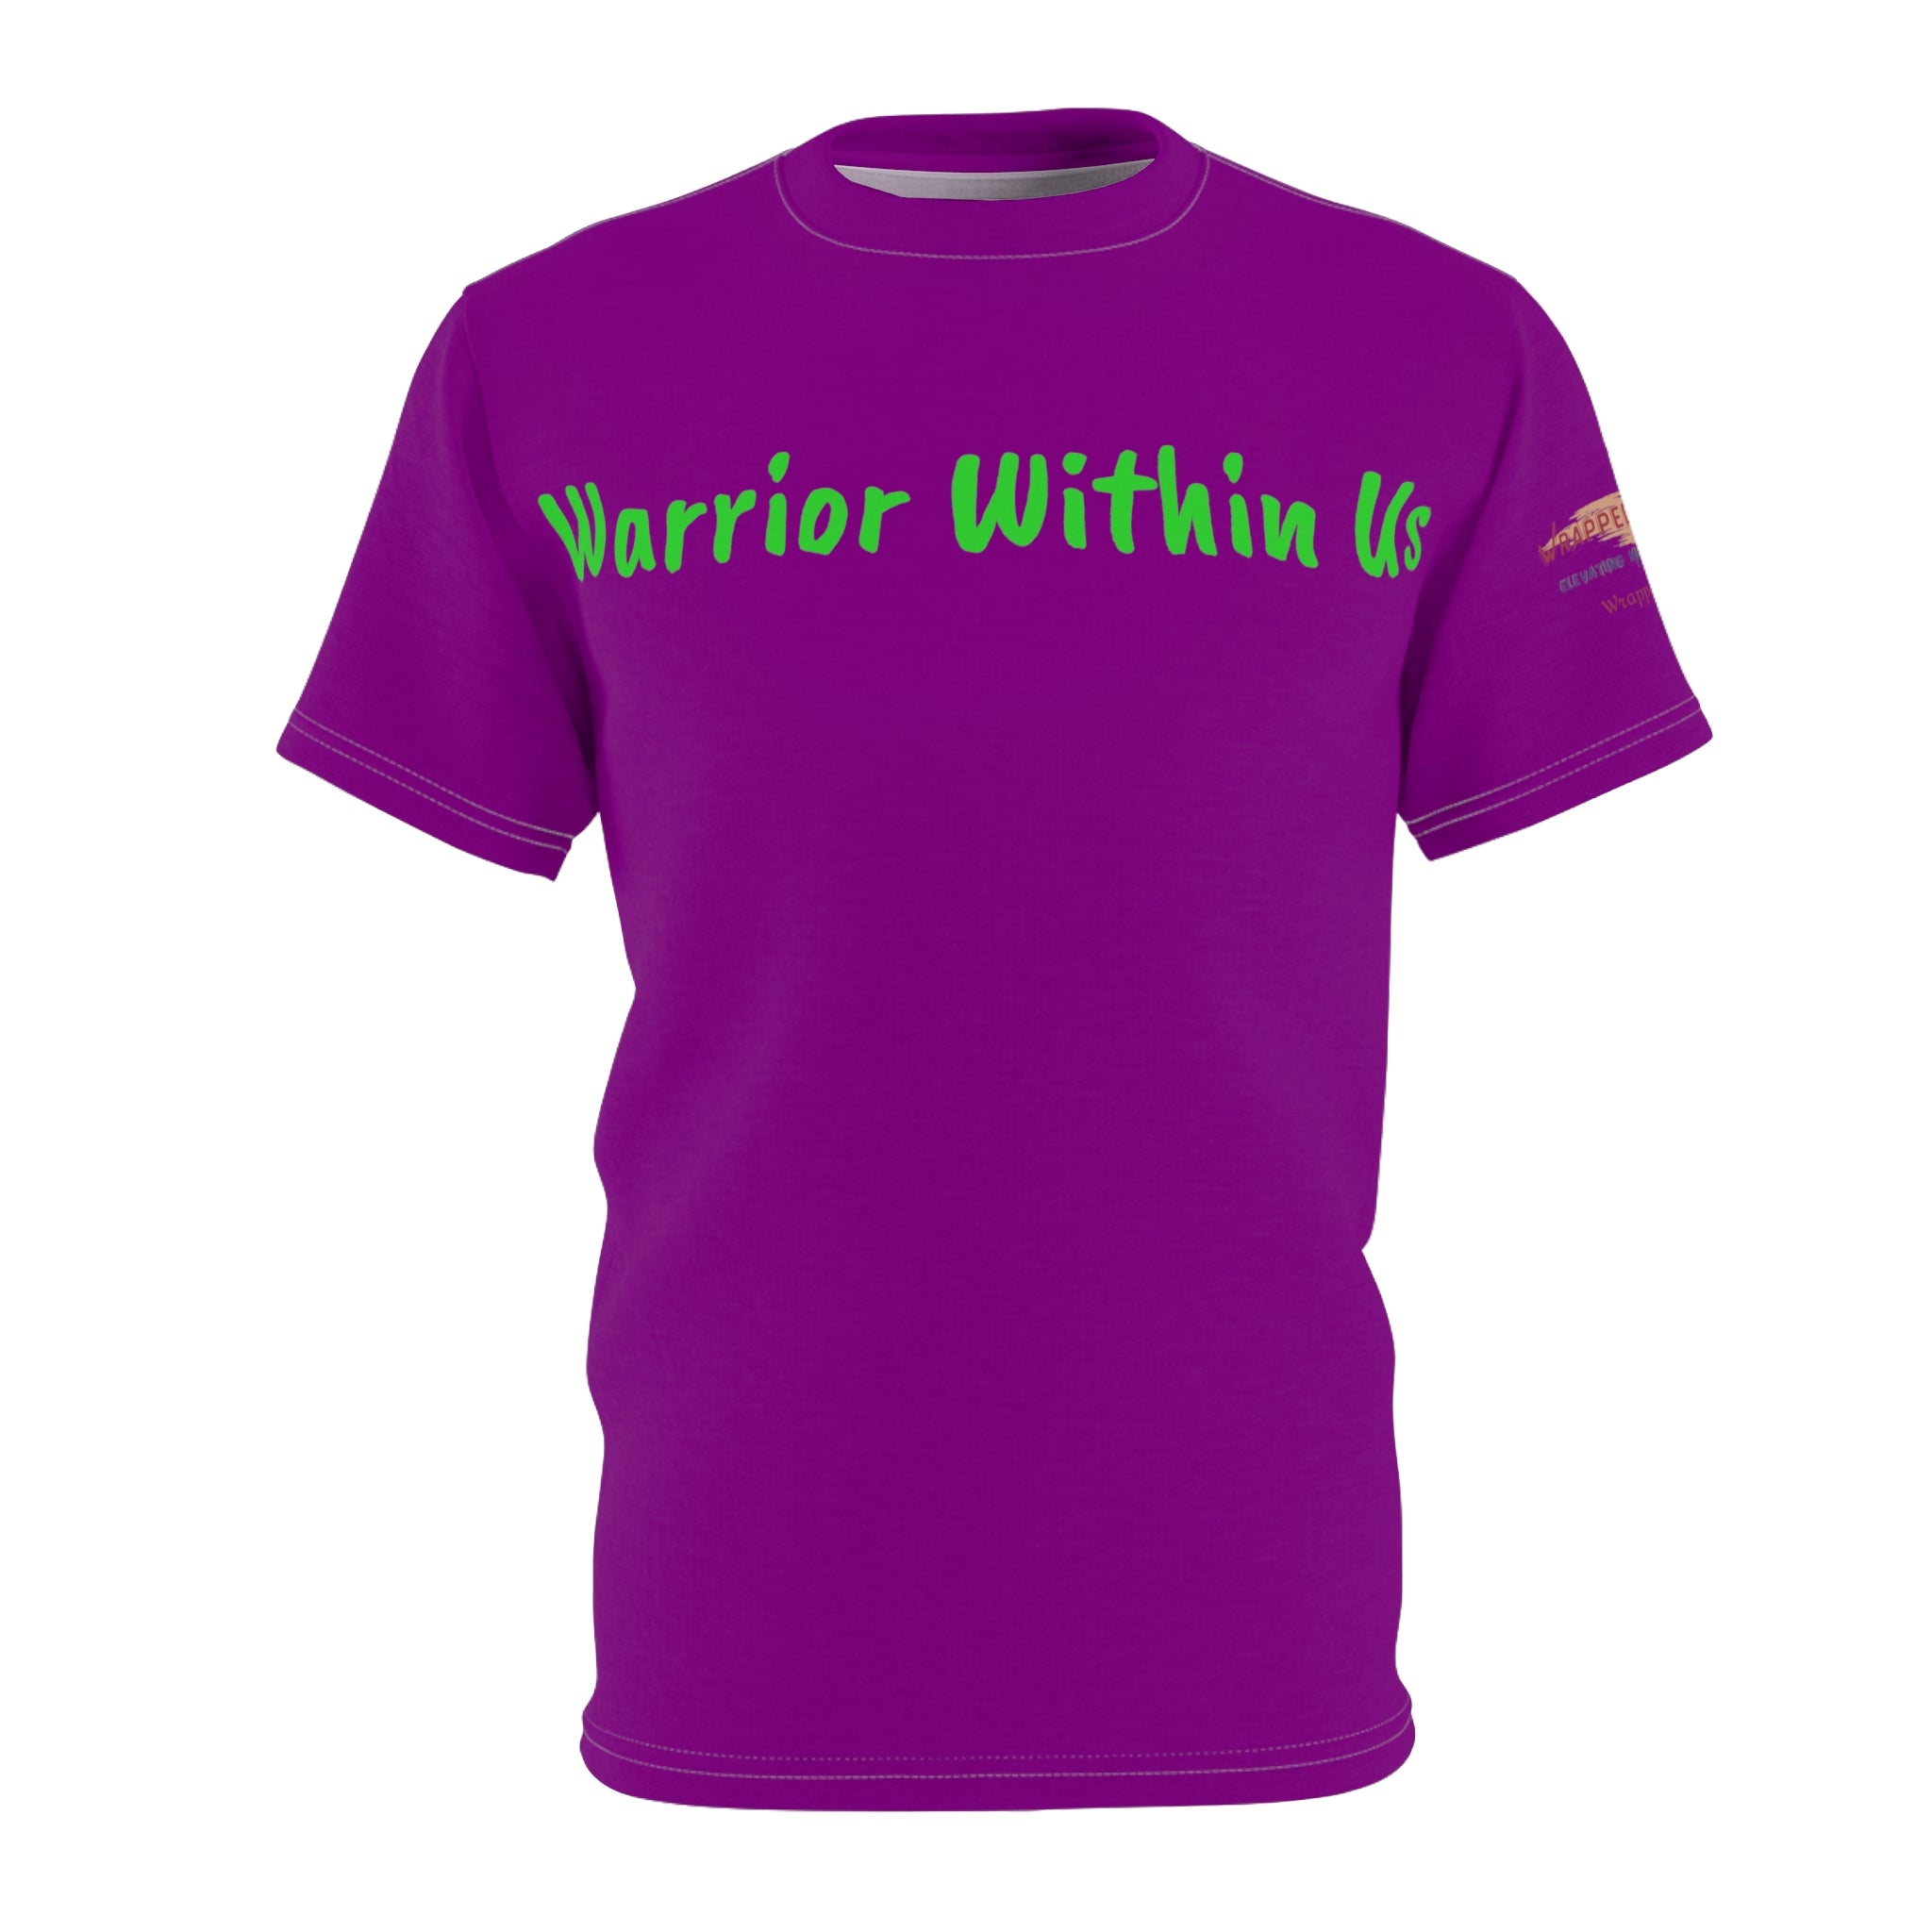 Warrior Within Us Cut & Sew Tee White stitching 4 oz. Athleisure Wear Comfort Cut & Sew Donation Initiative Polyester Stigma Strength Tee Unisex Warrior Within Us All Over Prints 17690293129539678235_2048 Printify